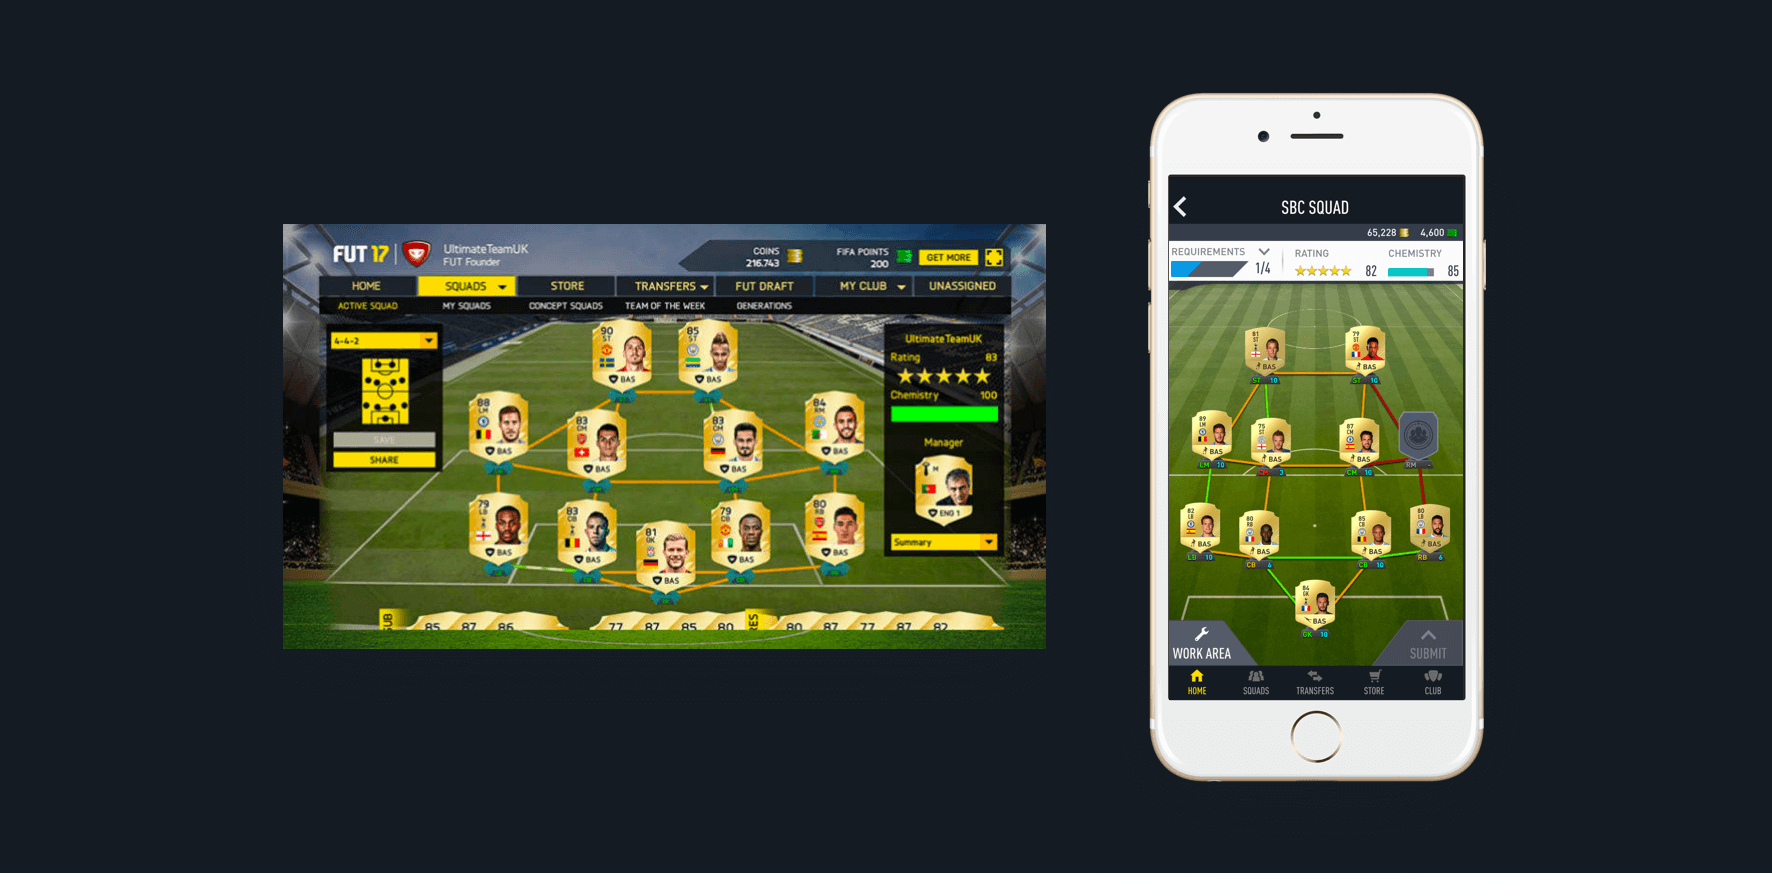 a web browser screen showing the FUT 17 Web App and an iPhone 8 showing the SBC Squad page